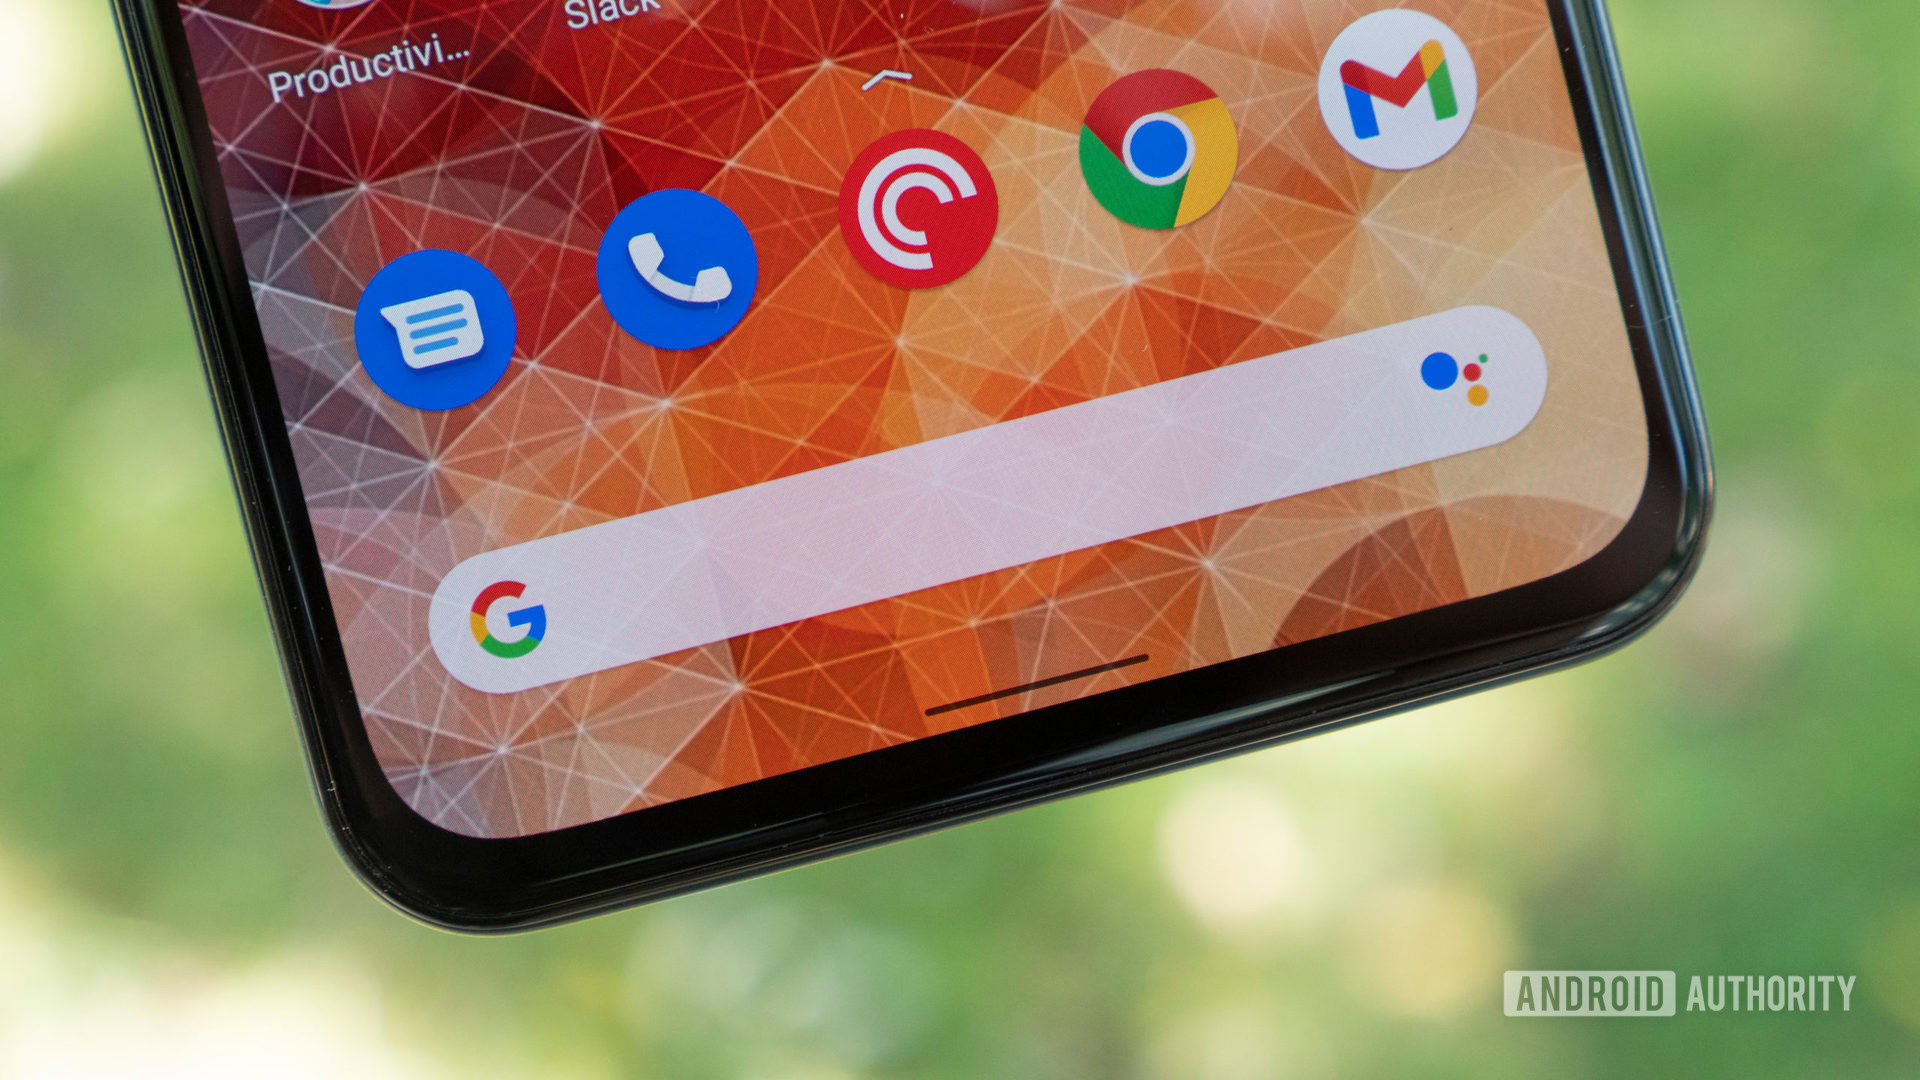 The home screen of google pixel 5a shows a close-up of the google search bar